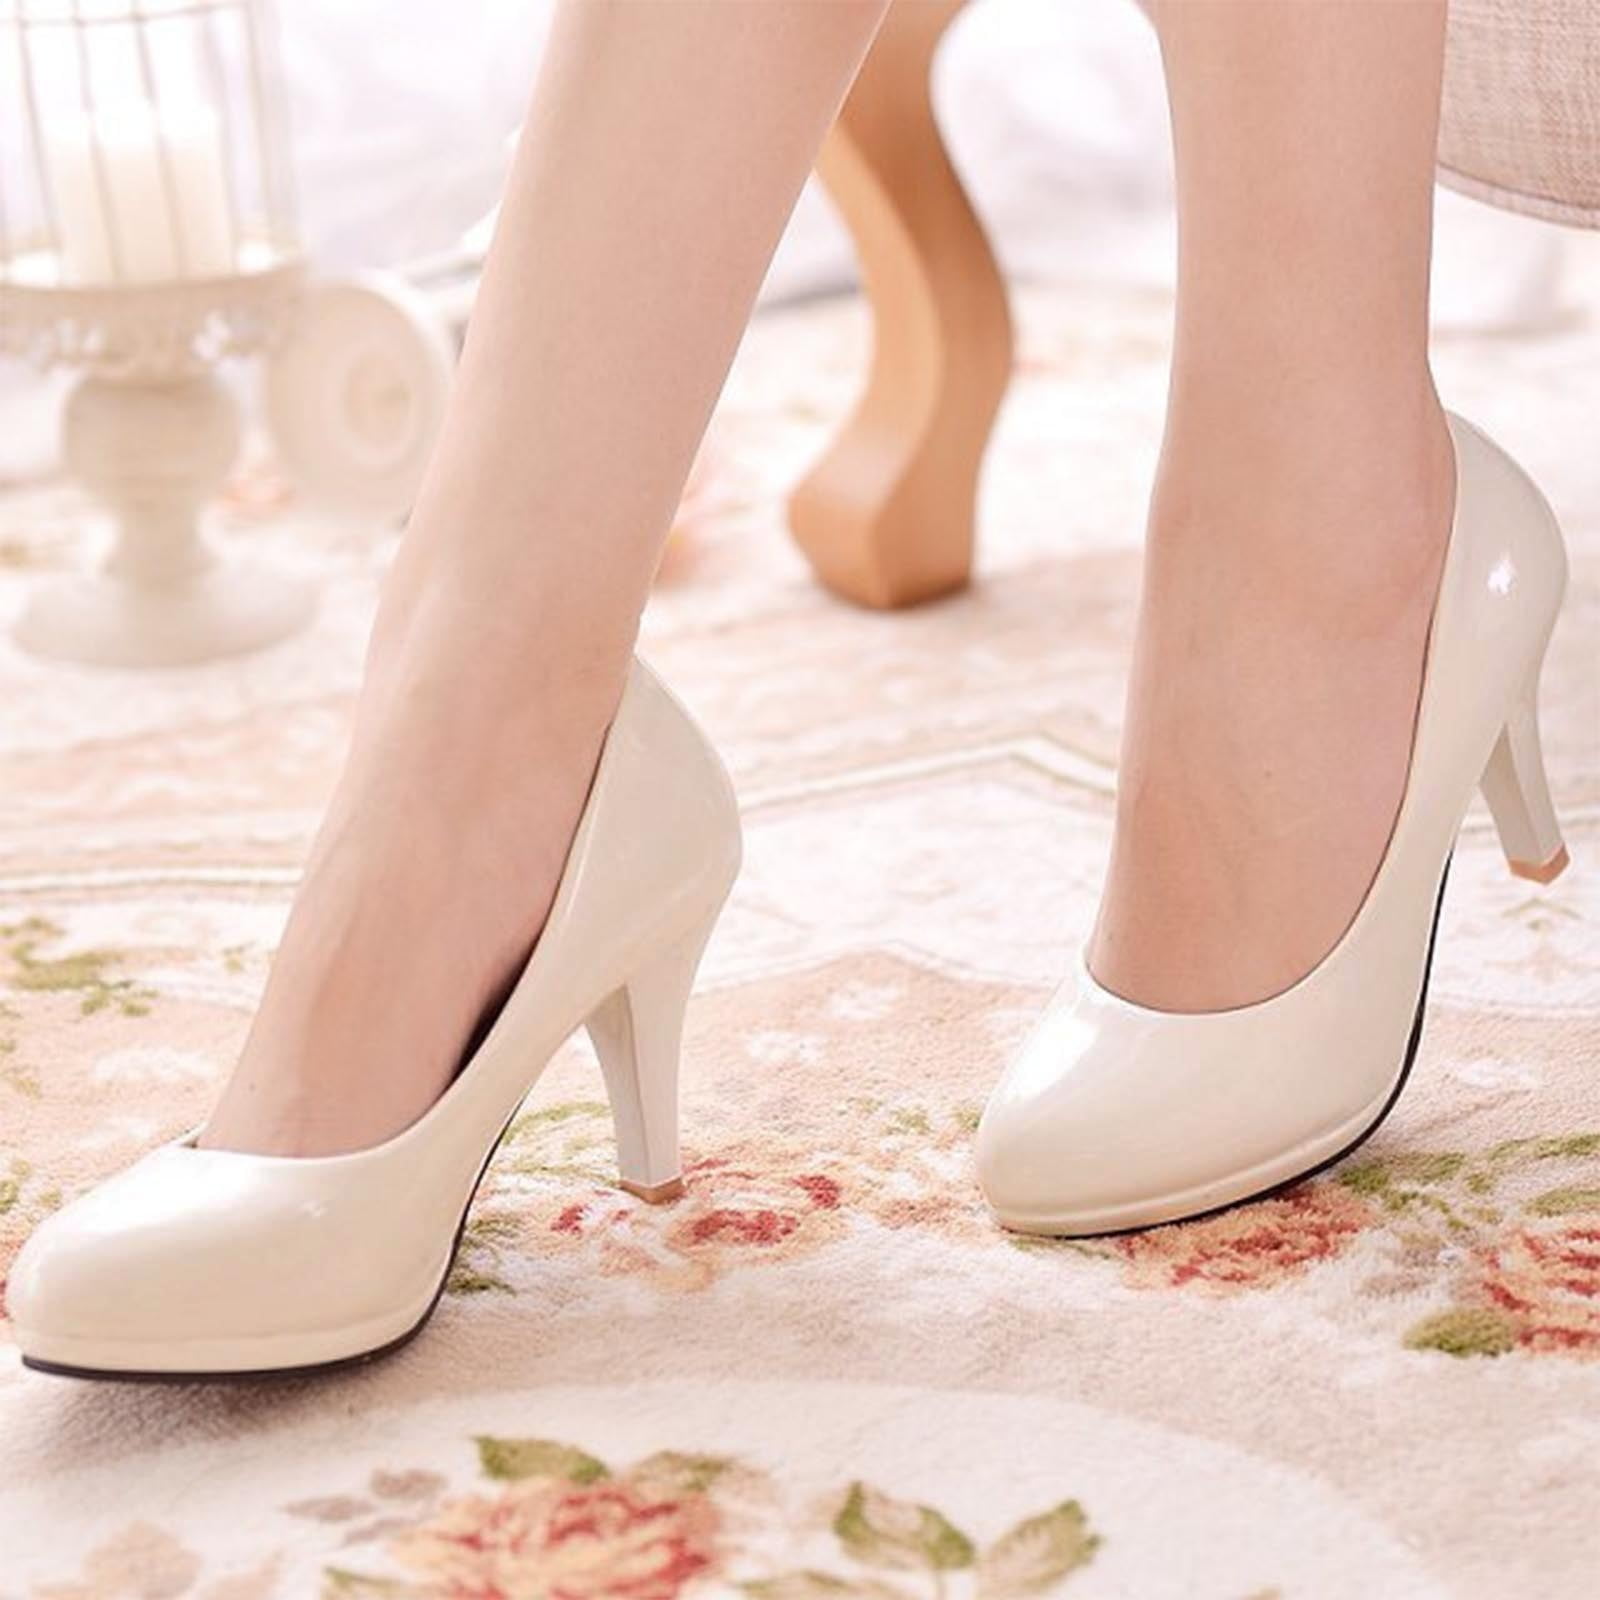 Women's Plus Size 12CM High Heels Pointed Dress Office Party Shoes fashion  comfy | eBay